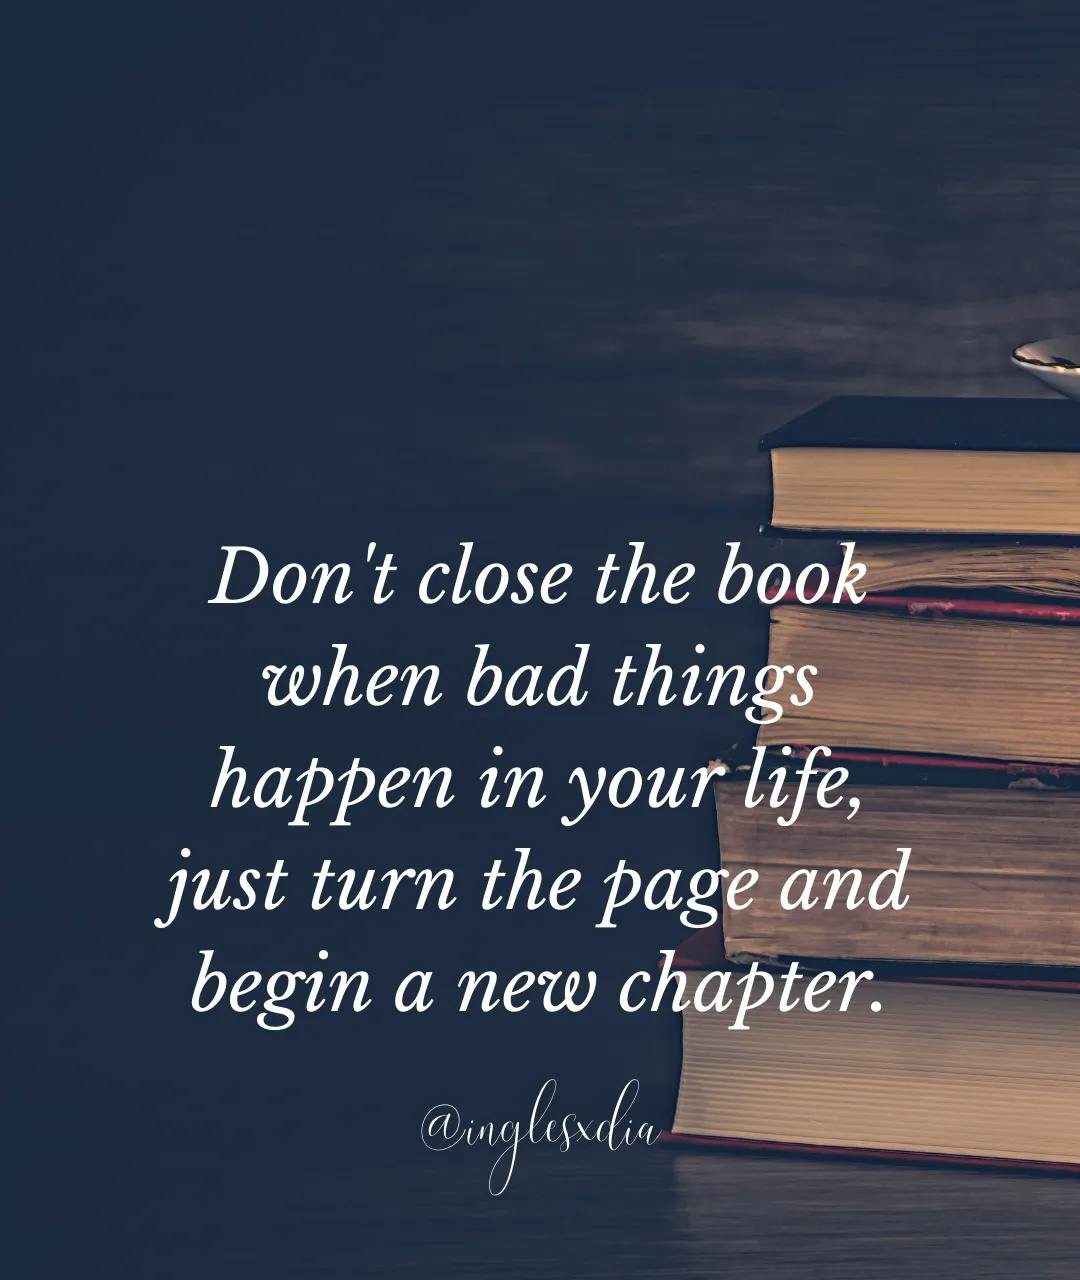 Frases motivadoras en inglés: Don't close the book when bad things happen in your life, just turn the page and begin a new chapter.